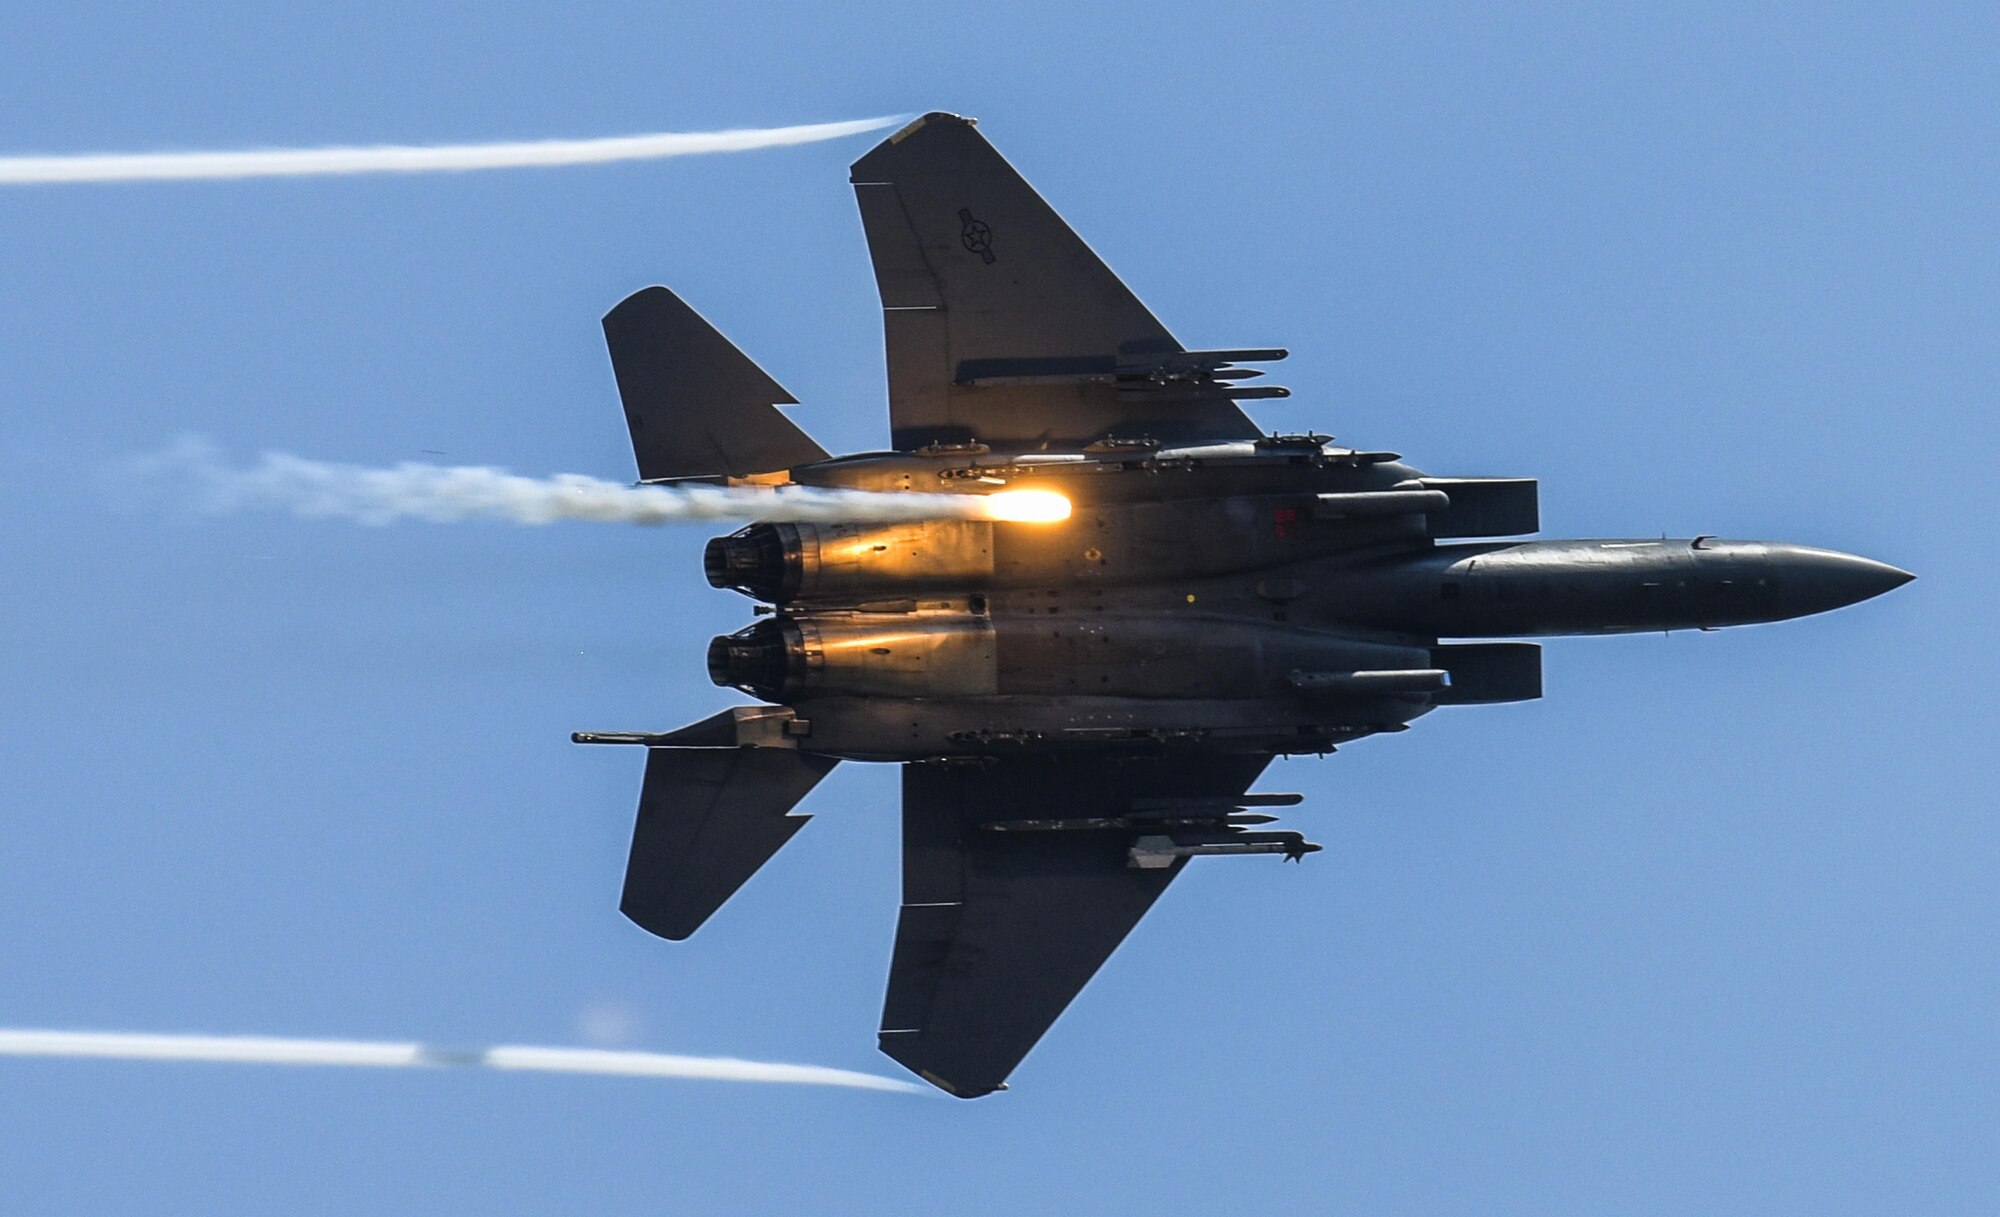 An F-15E Strike Eagle releases flares as part of a combined arms demonstration during the Wings Over Wayne Air Show, May 21, 2017, at Seymour Johnson Air Force Base, N.C. The demonstration showcased both the air-to-air and air-to-ground capabilities of the Strike Eagle. (U.S. Air Force photo/Staff Sgt. Brittain Crolley)